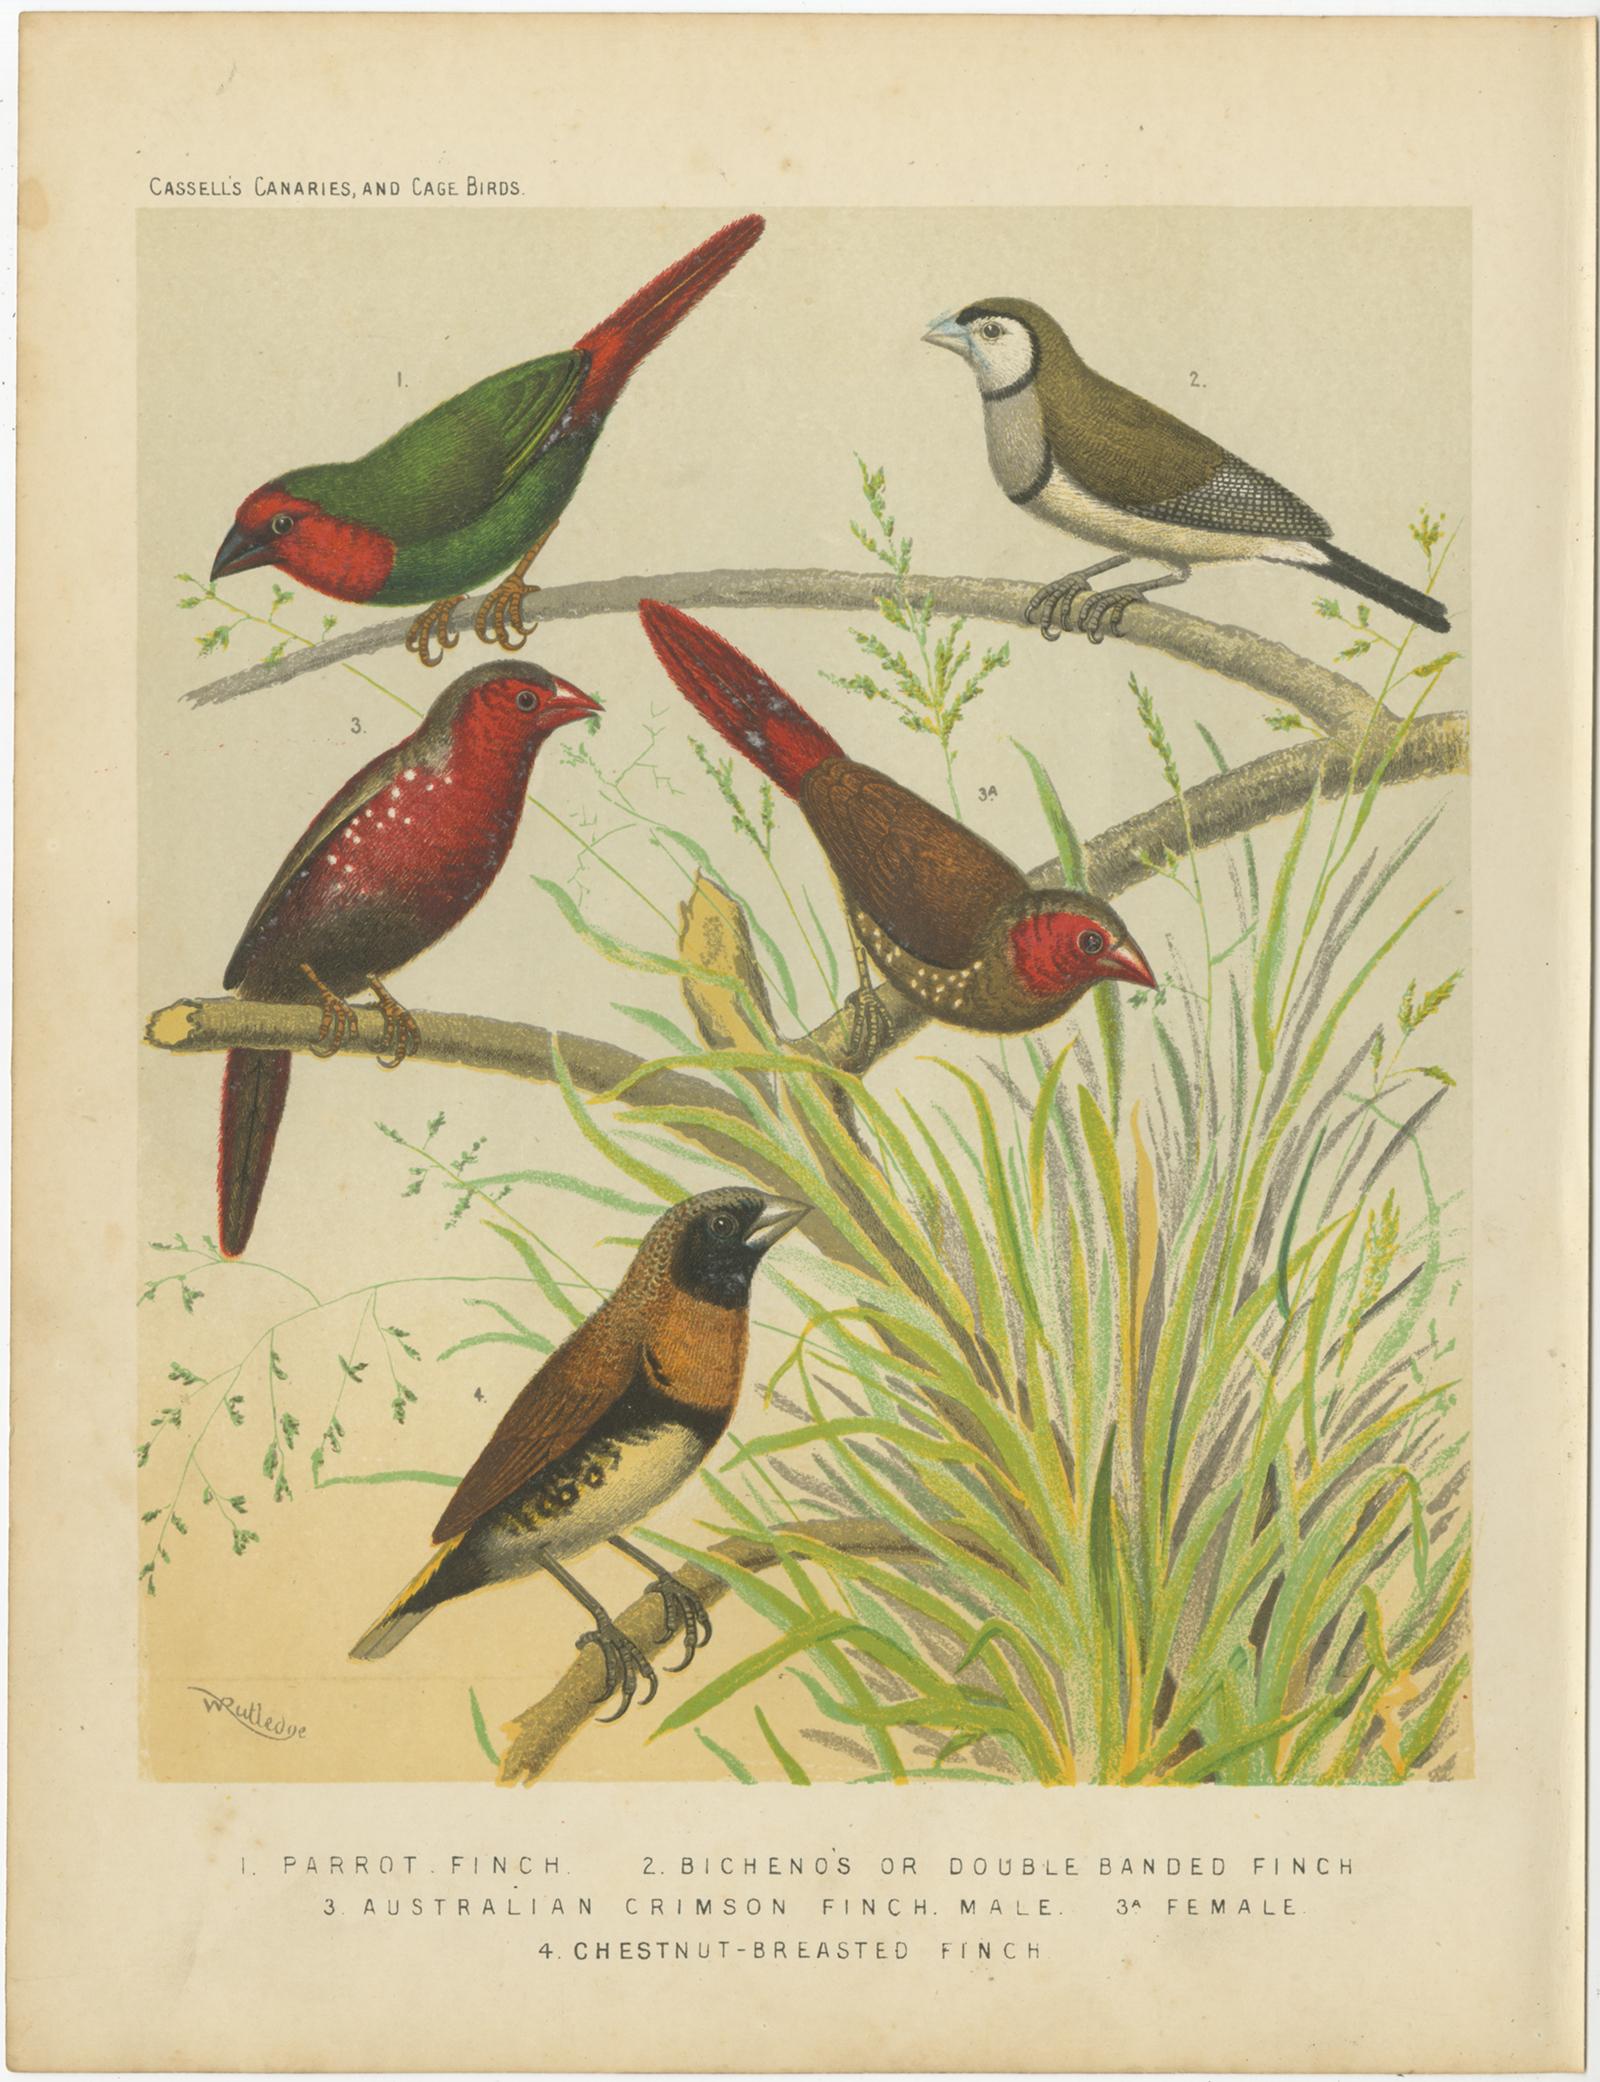 Antique bird print titled '1. Parrot Finch 2. Bichenos or Double Banded Finch 3. Australian Crimson Finch Male 4. Chestnut-Breasted Finch' Old bird print depicting the Parrotfinch, Double Barred Finch, Crimson Finch, Chestnut-Breasted Finch. This